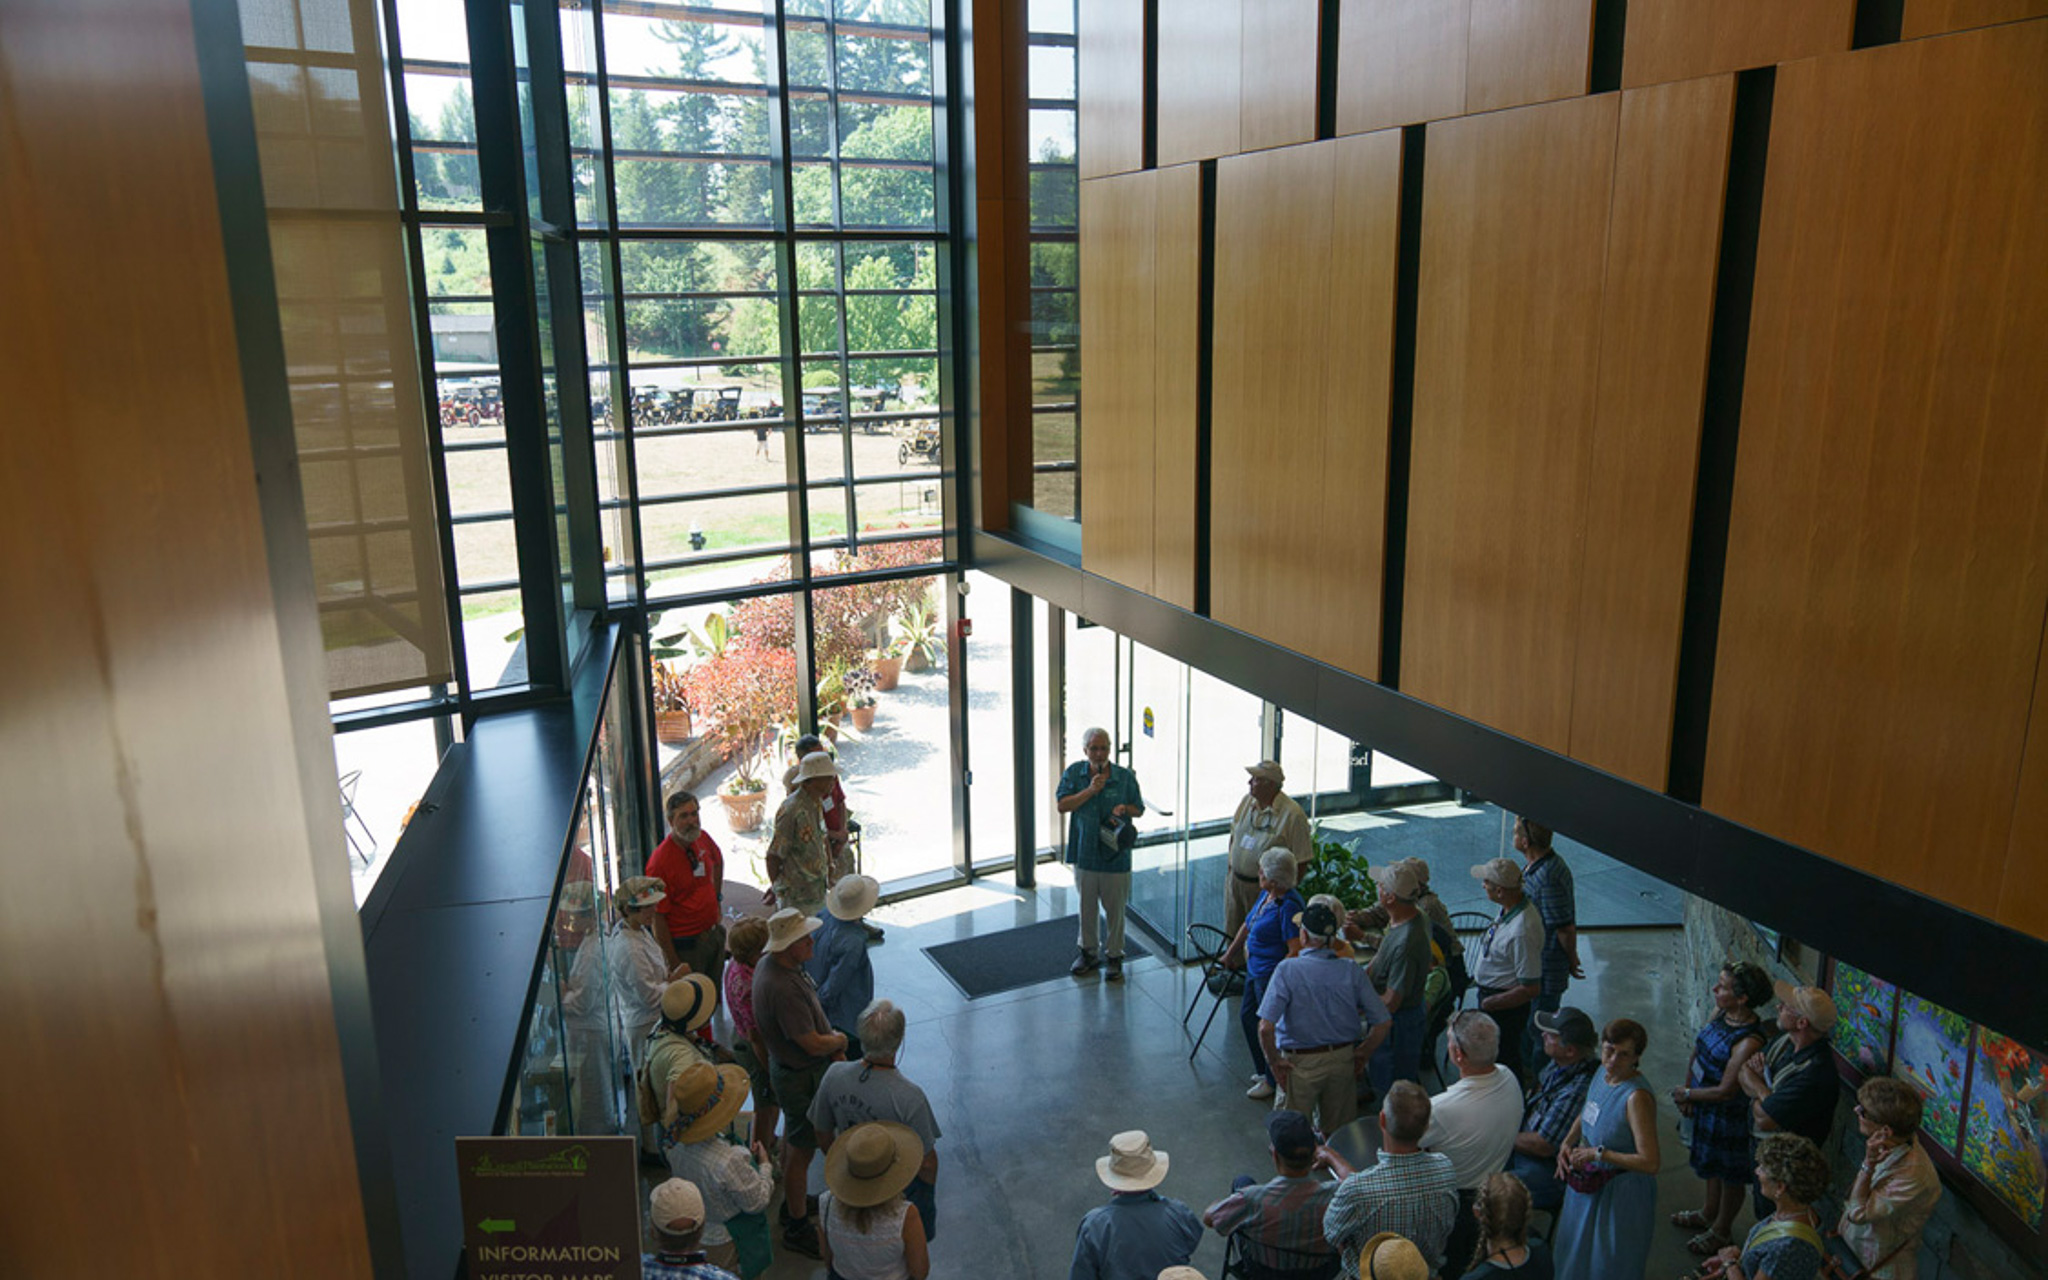 Guests congregate inside the Nevin Center